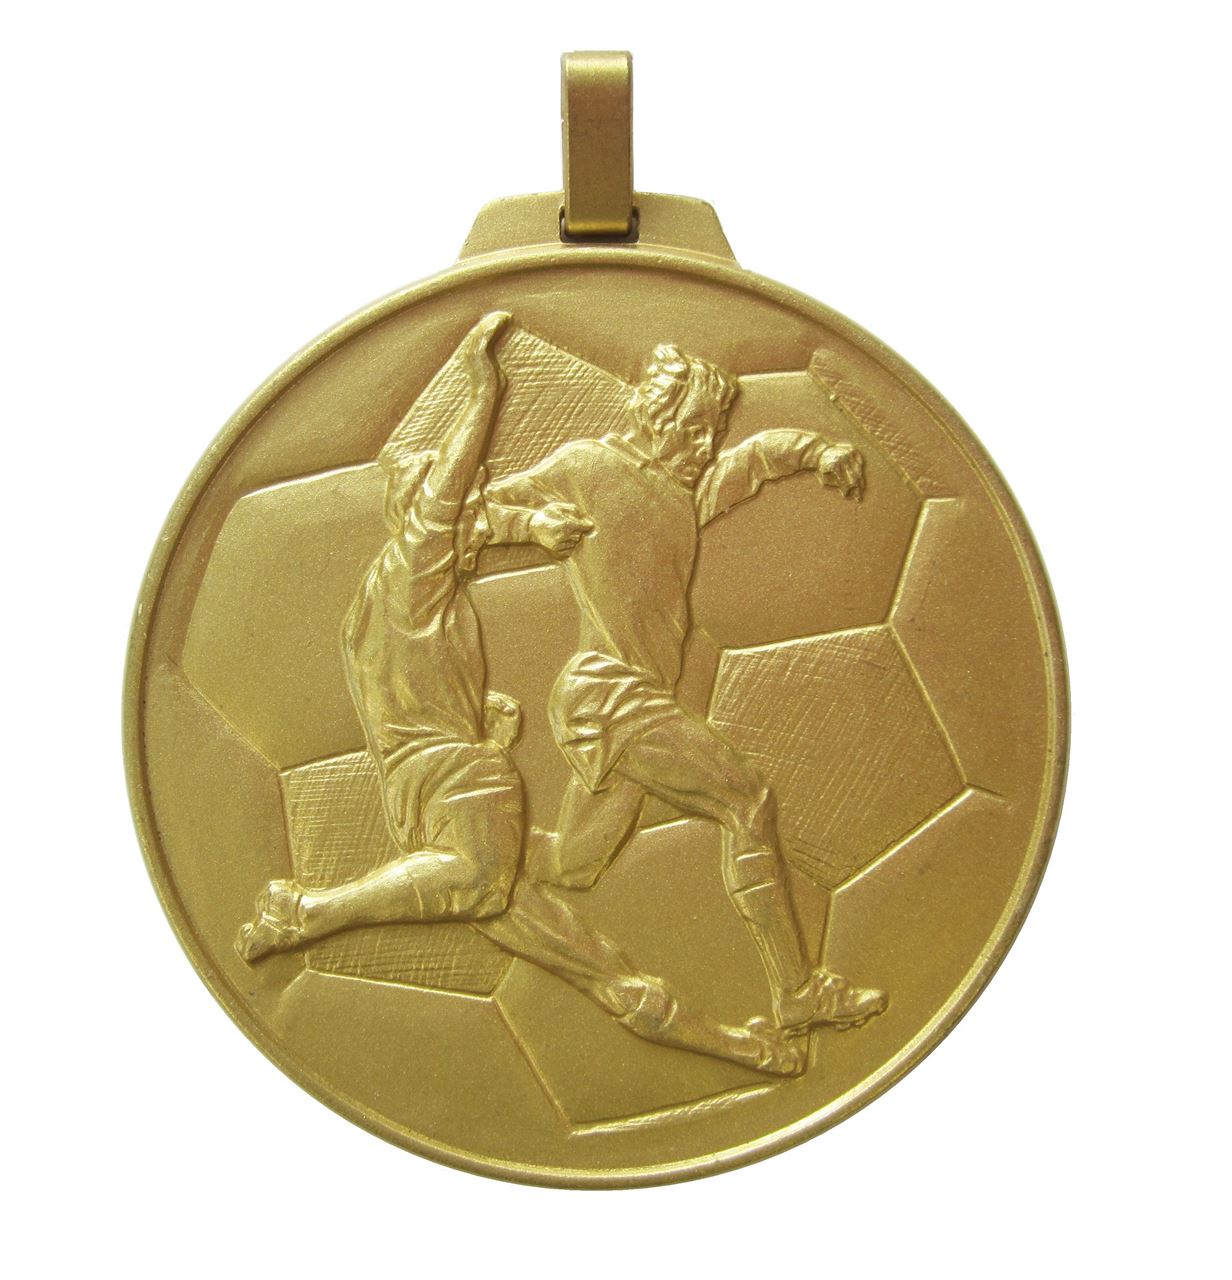 Gold Economy Football Medal (size: 70mm) - 176E